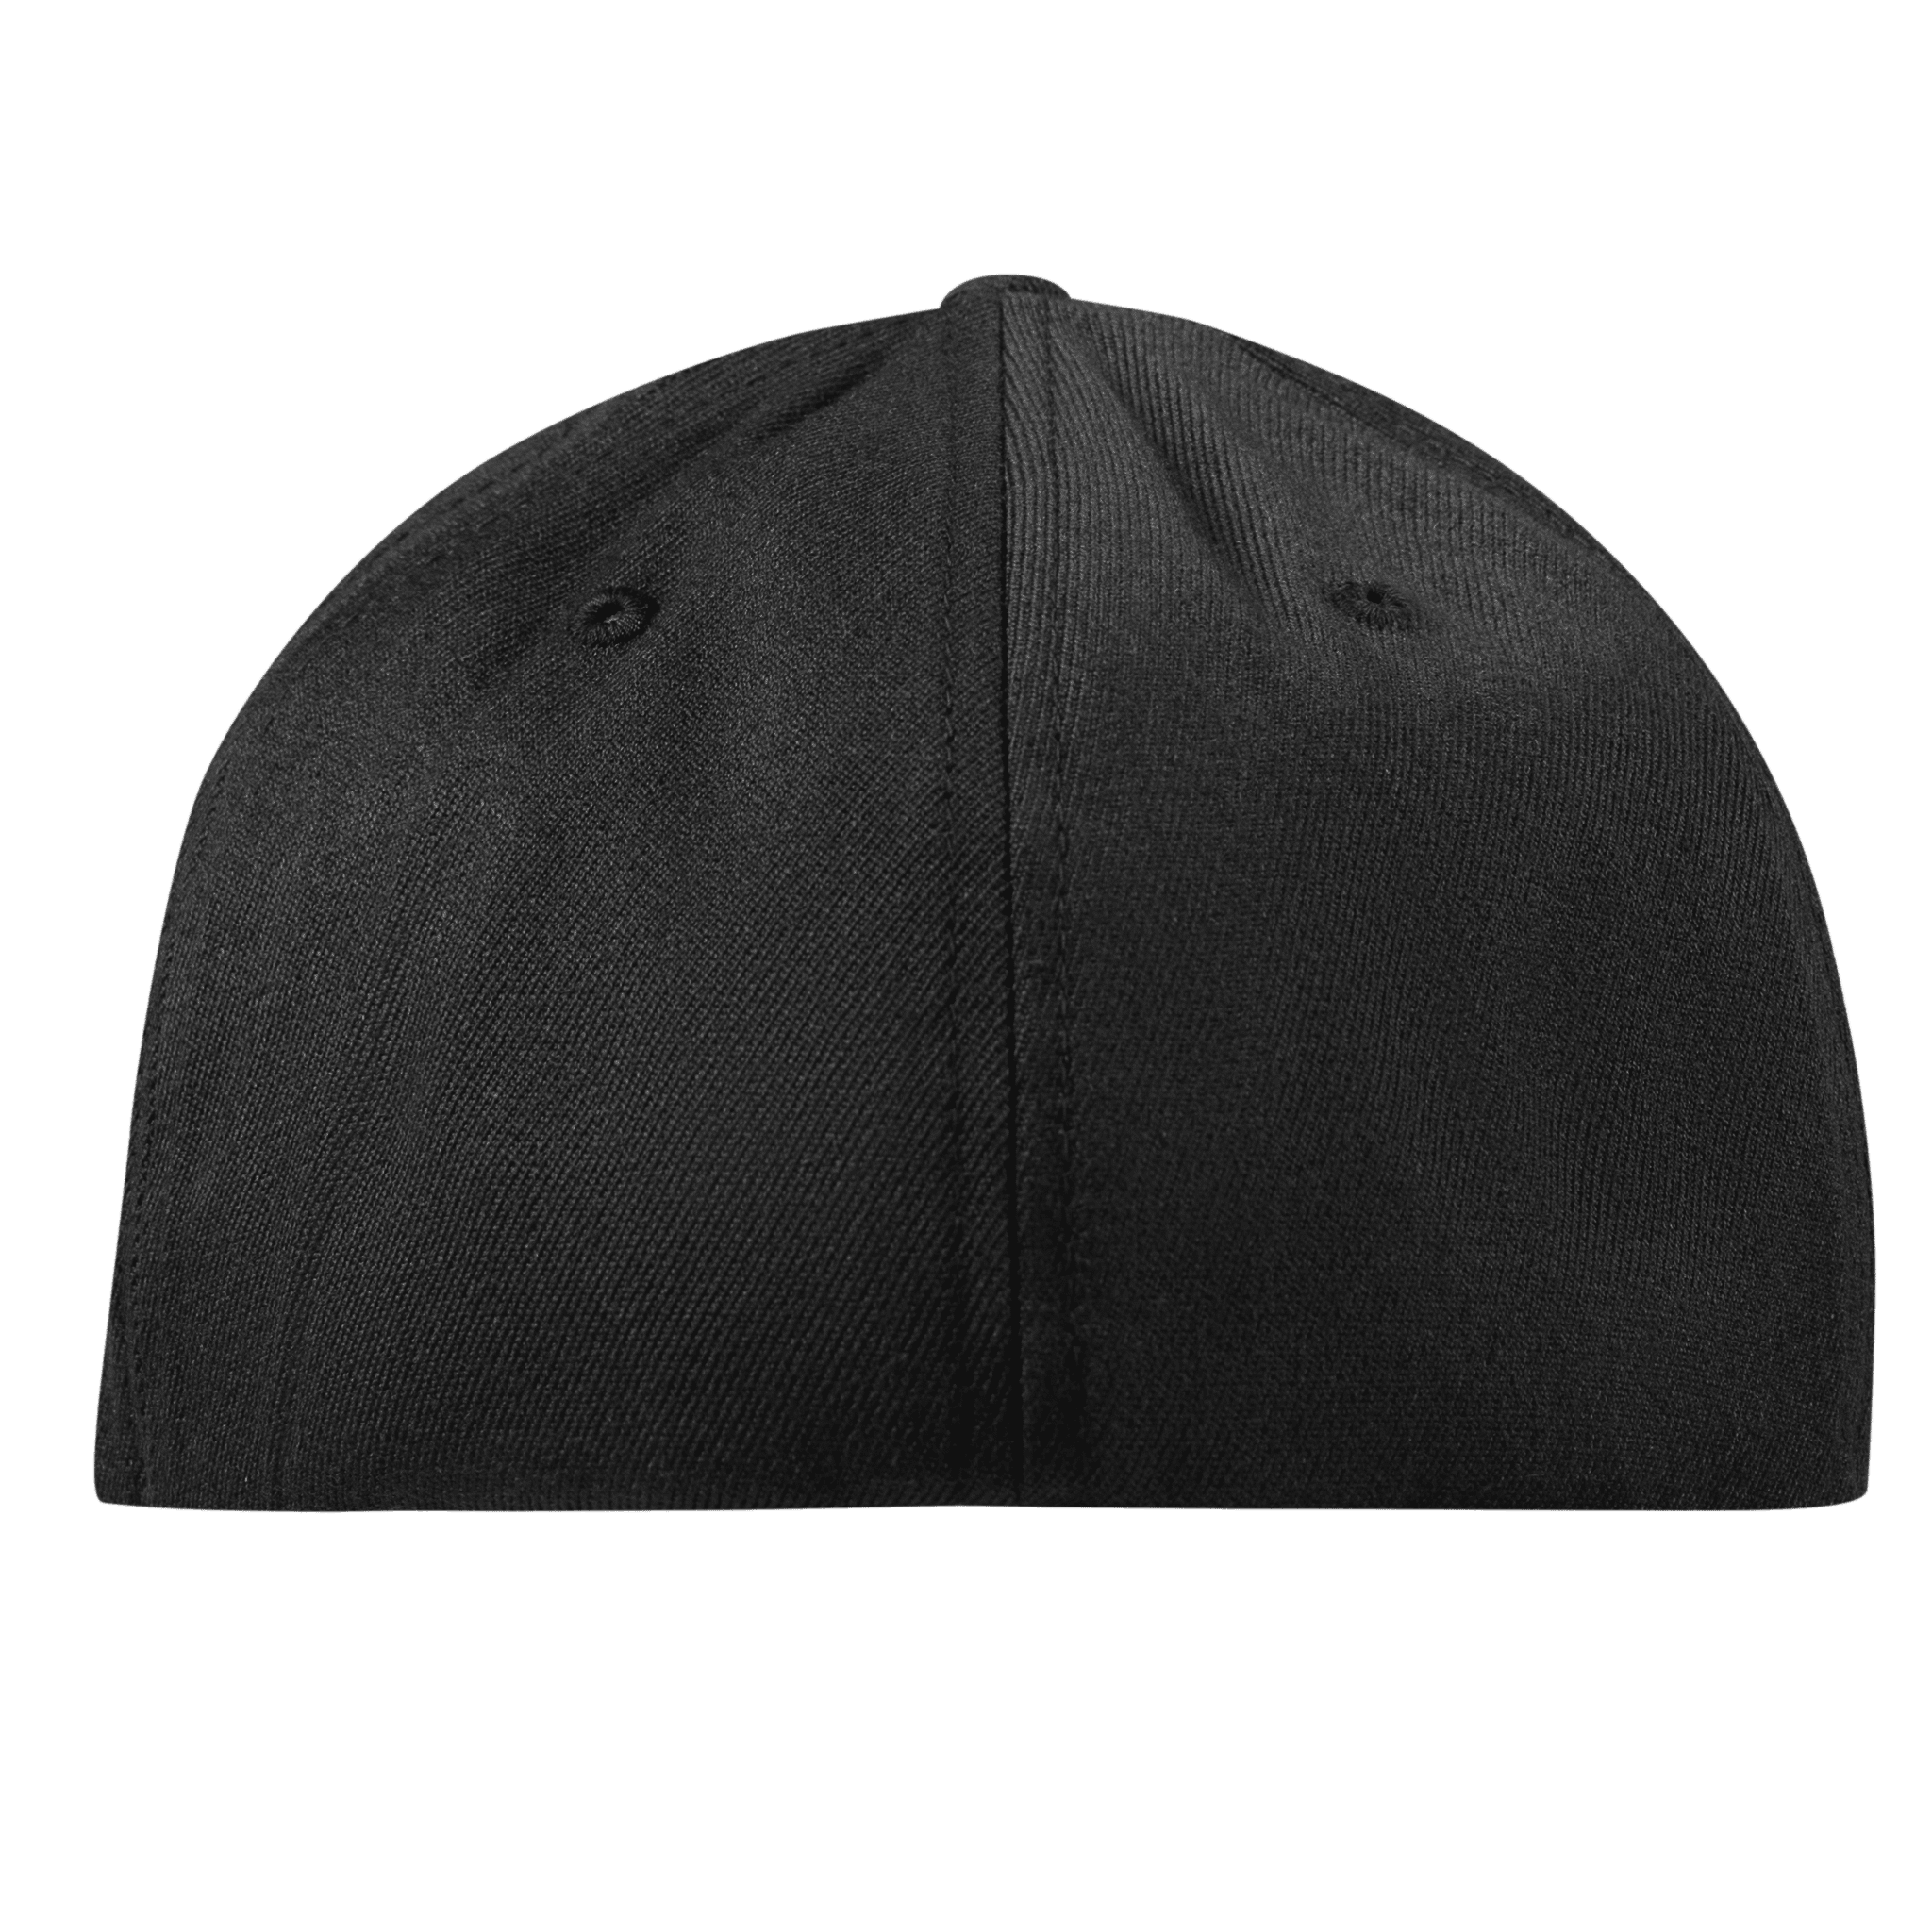 Montana Compass Flexfit Fitted Back Black